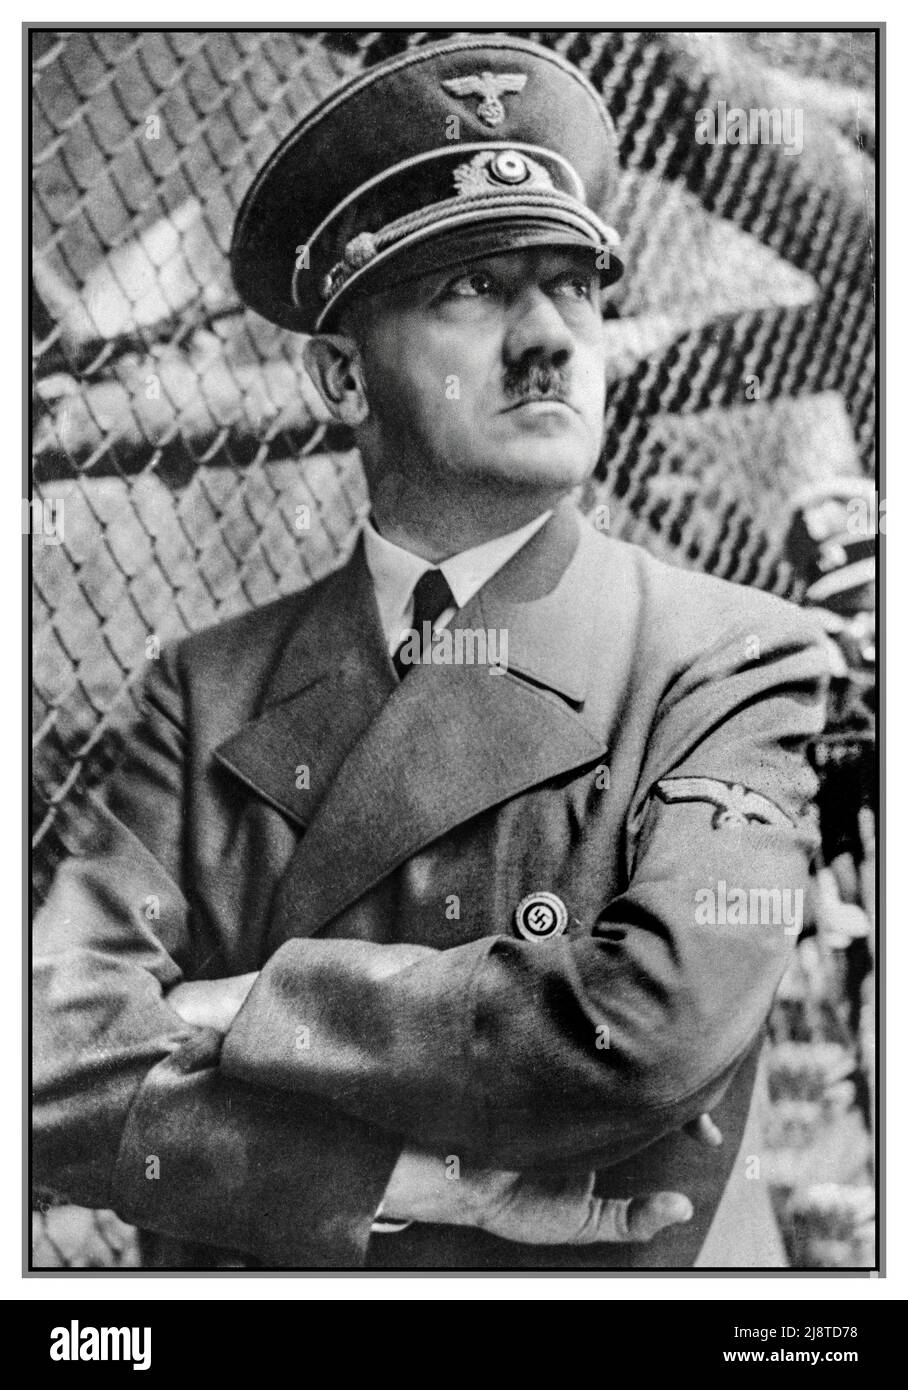 Adolf Hitler pensive serious arms folded. Posing outdoors at the battlefront 1940s WW2 in military uniform with cap, wearing a Nazi Party swastika pin badge Stock Photo